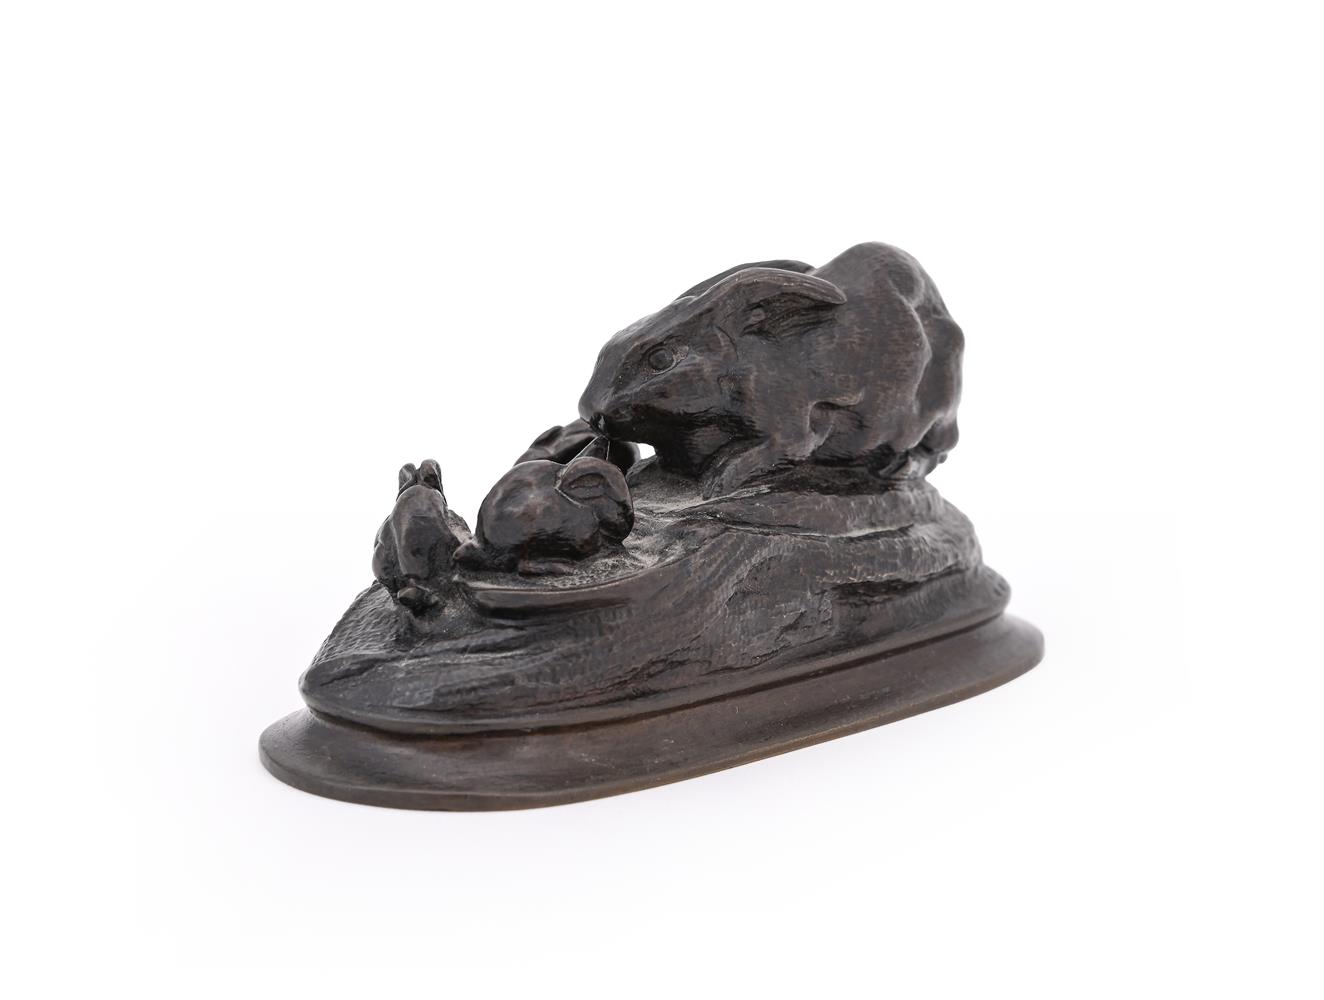 AUGUSTE CAIN (FRENCH, 1821-1894), A BRONZE MODEL OF RABBIT WITH YOUNG - Image 4 of 5